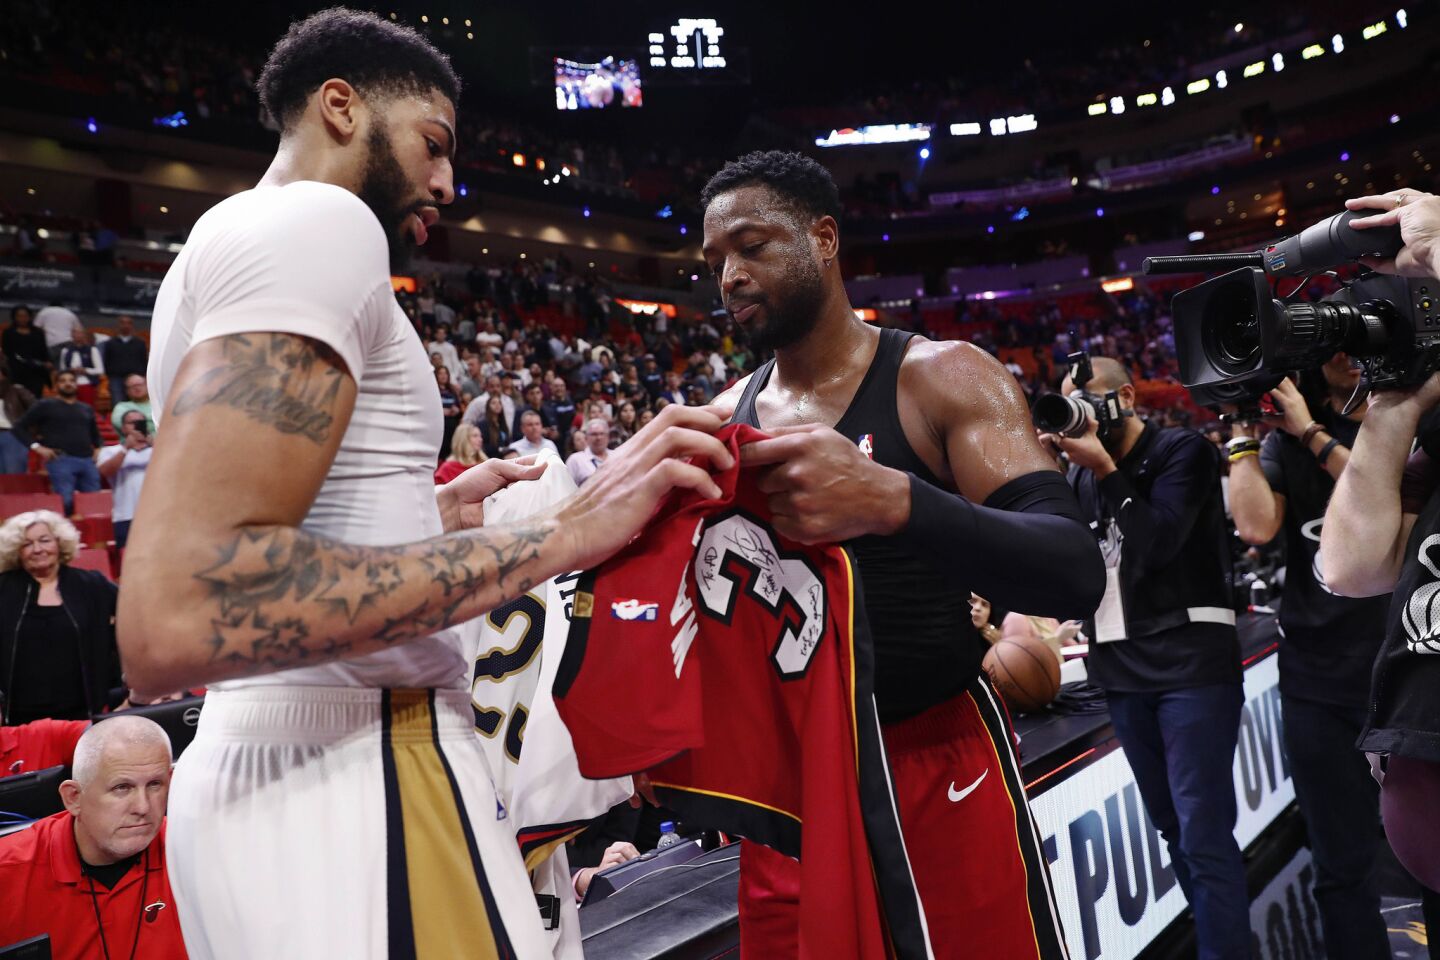 Pelicans forward Anthony Davis and Miami Heat guard Dwyane Wade trade jerseys after a game Nov. 30, 2018, in Miami.